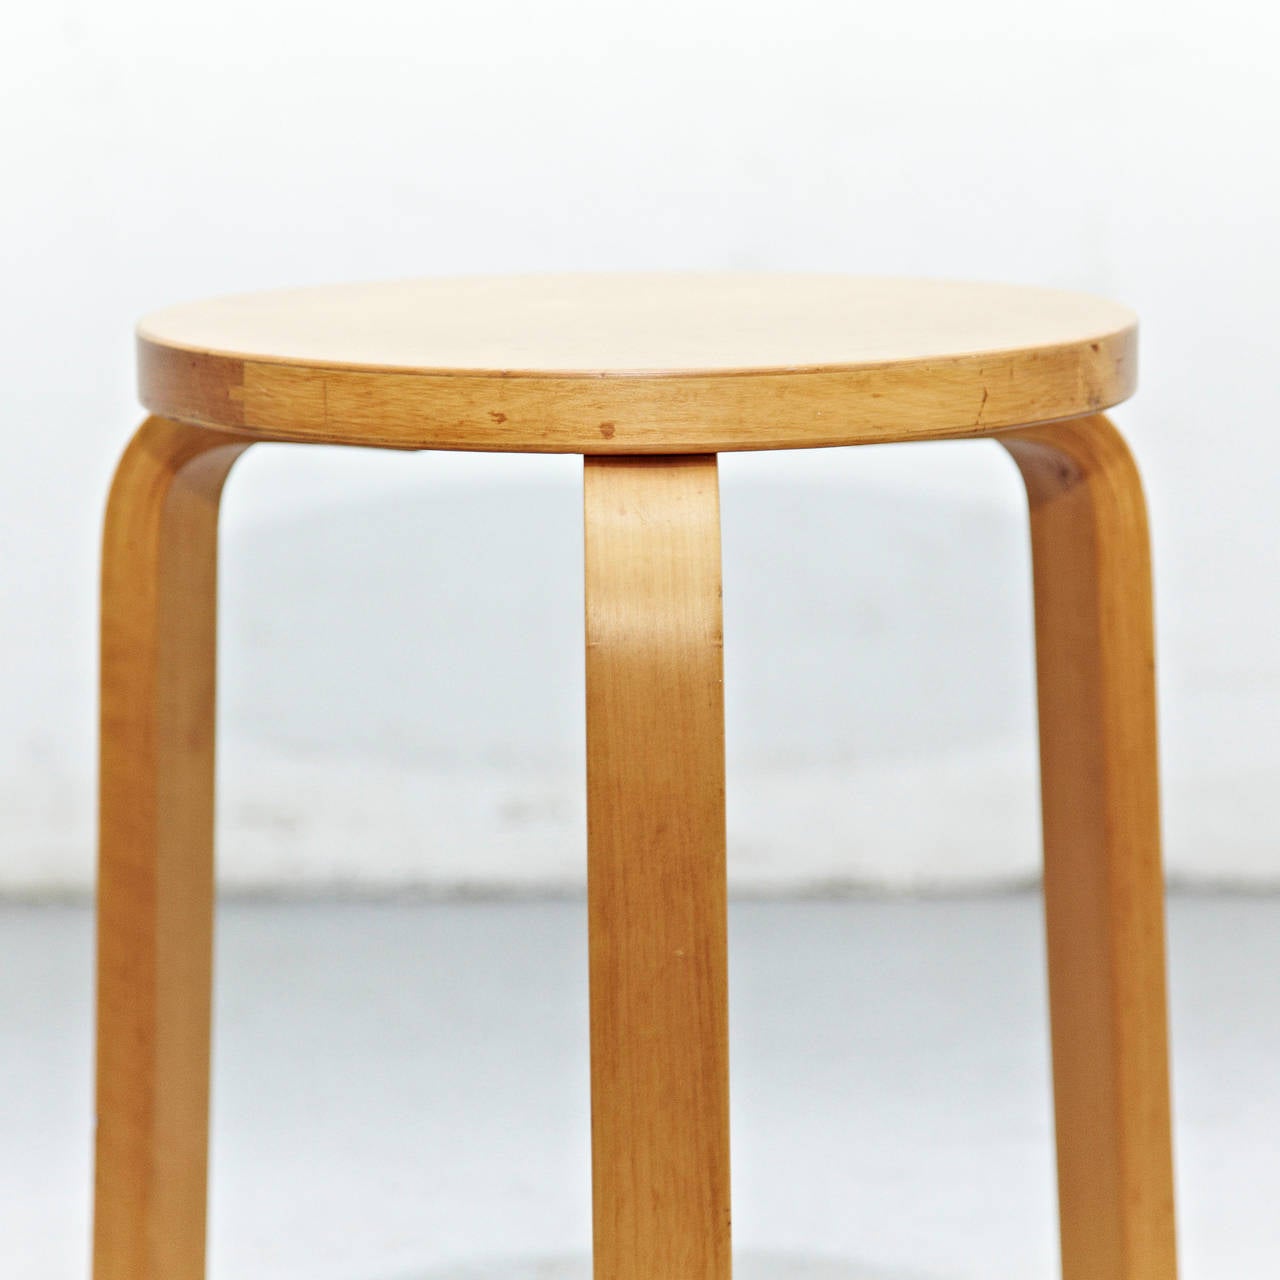 Stool designed by Alvar Aalto, circa 1960.
Manufactured by Artek (Finland)
Wood legs and structure.

In good original condition, with minor wear consistent with age and use, preserving a beautiful patina.

Hugo Alvar Henrik Aalto (1898-1976)